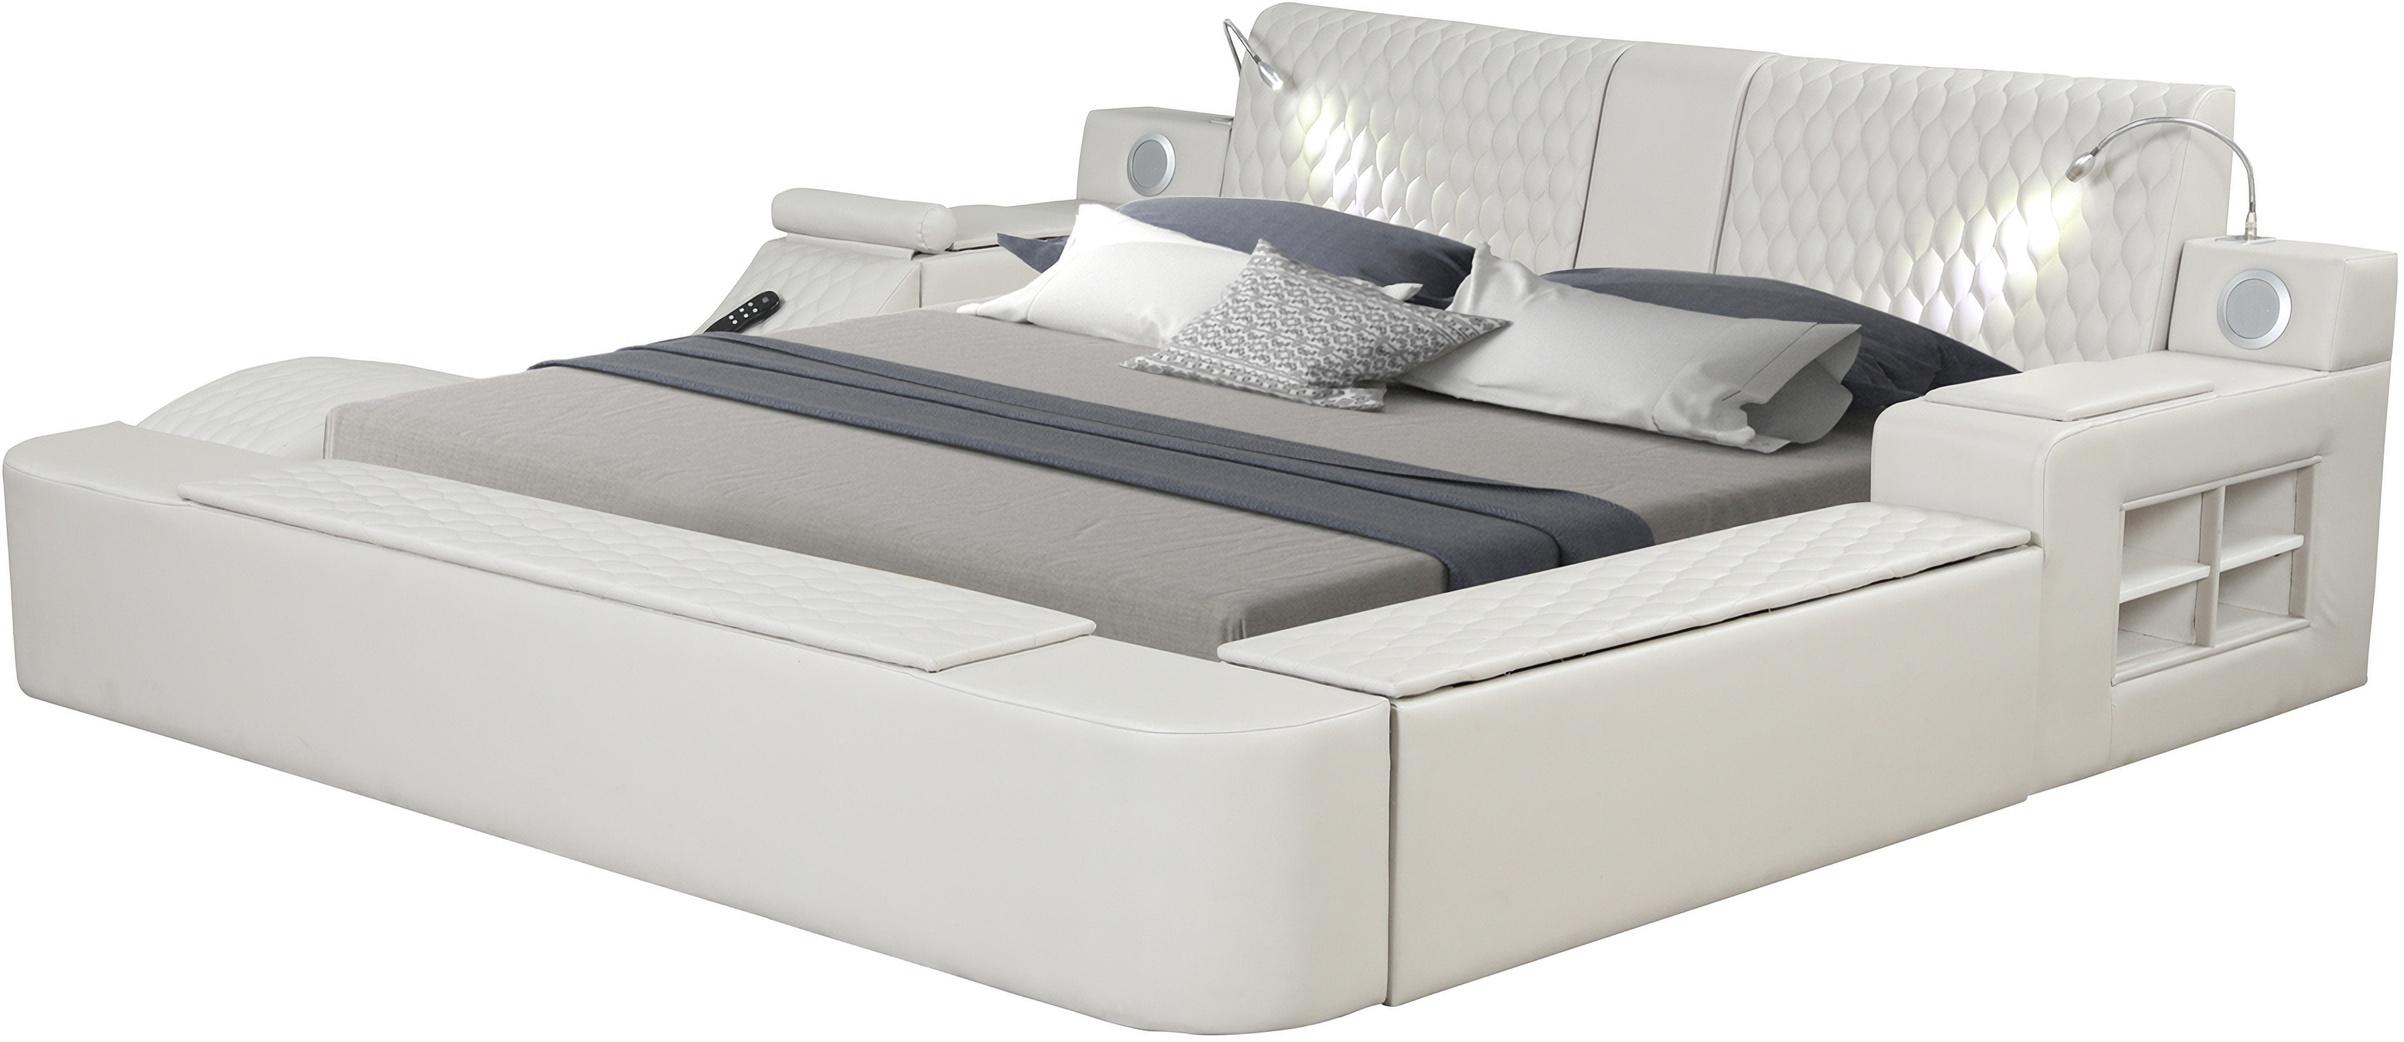 

    
Ice Eco Leather Smart Multifunctional King Bed ZOYA Galaxy Home Contemporary
